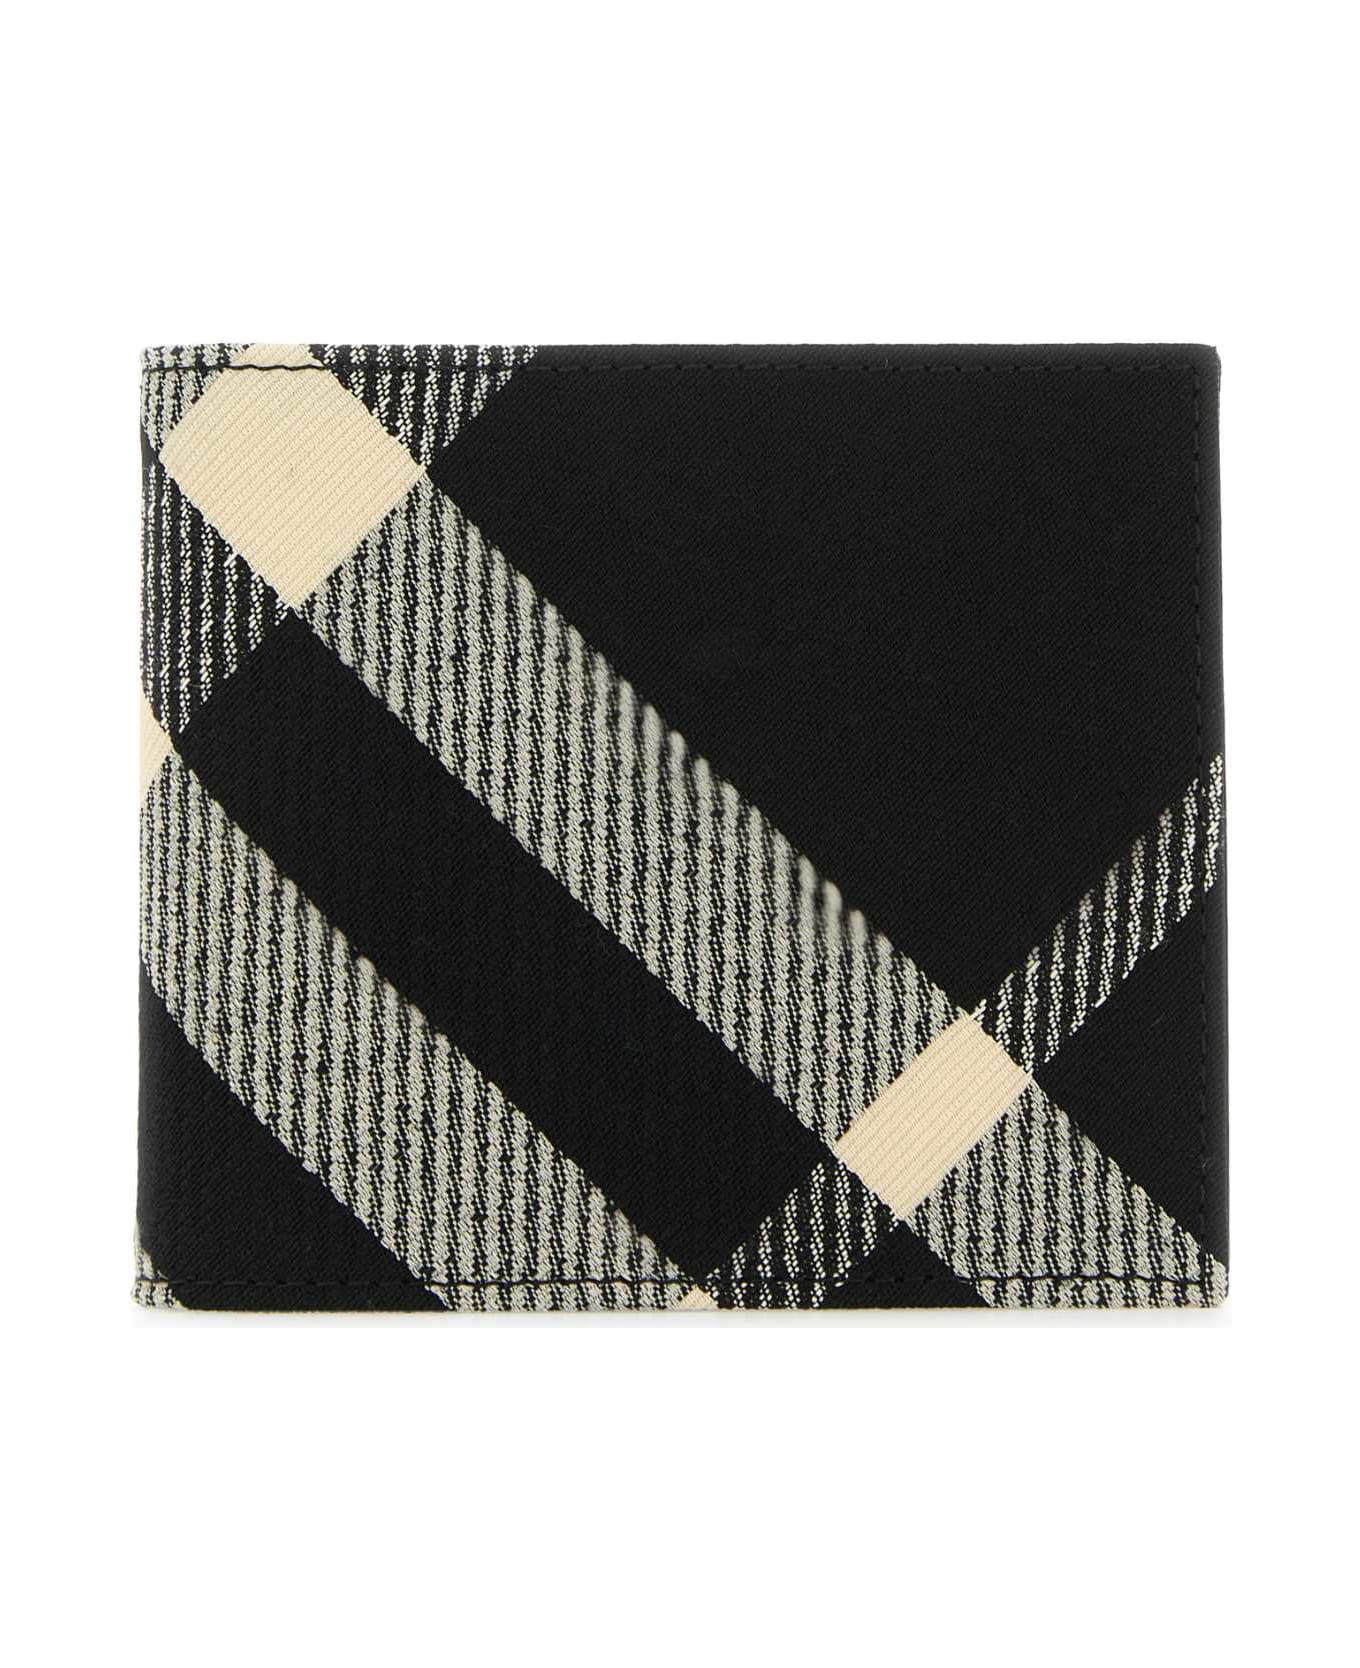 Burberry Embroidered Canvas Wallet - BLACKCALICO